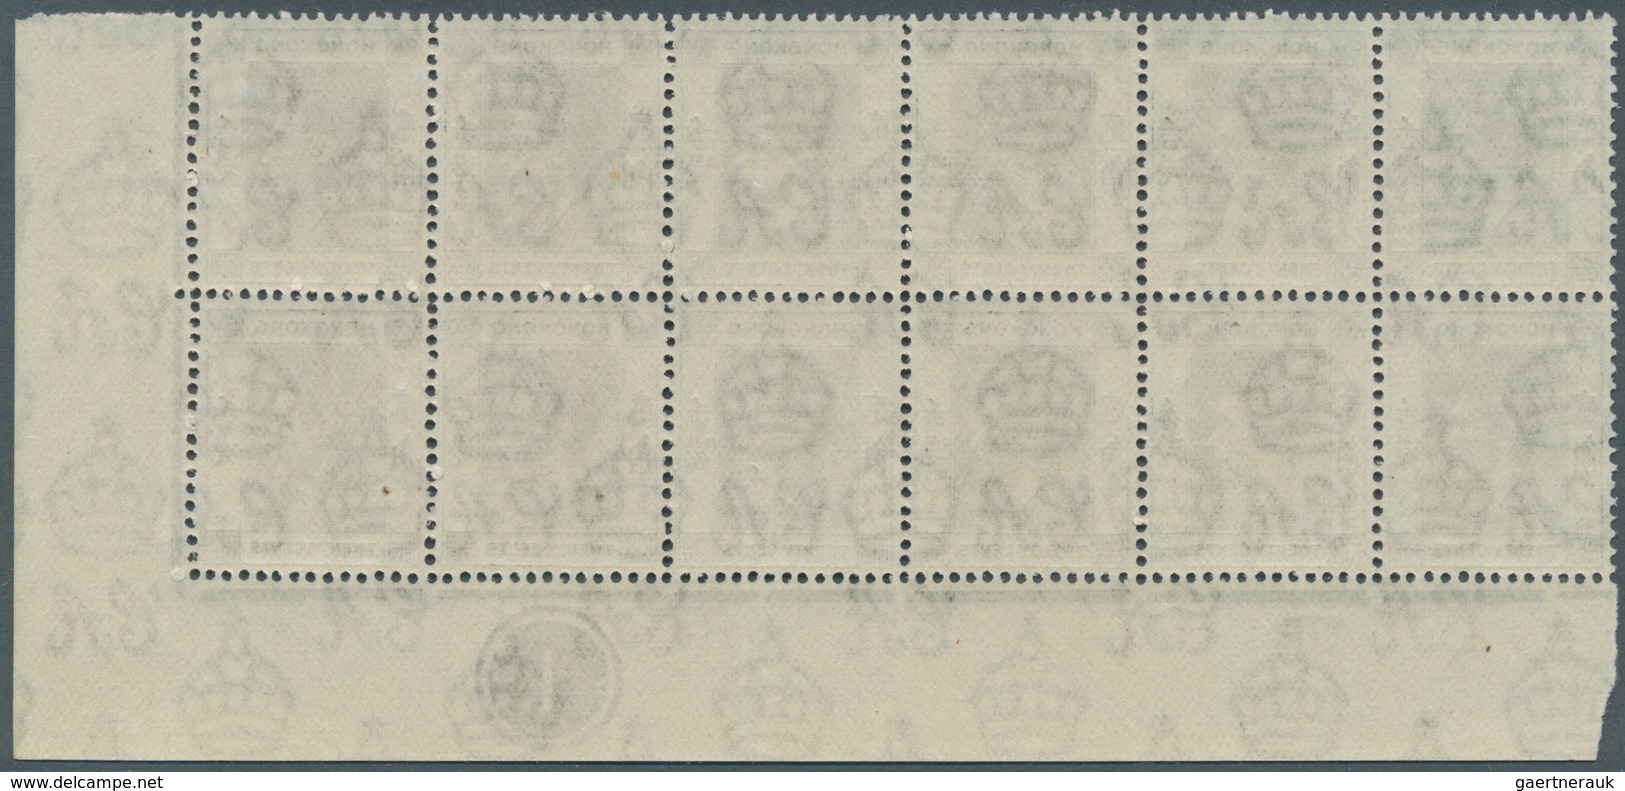 08584 Hongkong: 1938/1948, KGVI definitives 14 different stamps with many in pairs or blocks/4 and larger